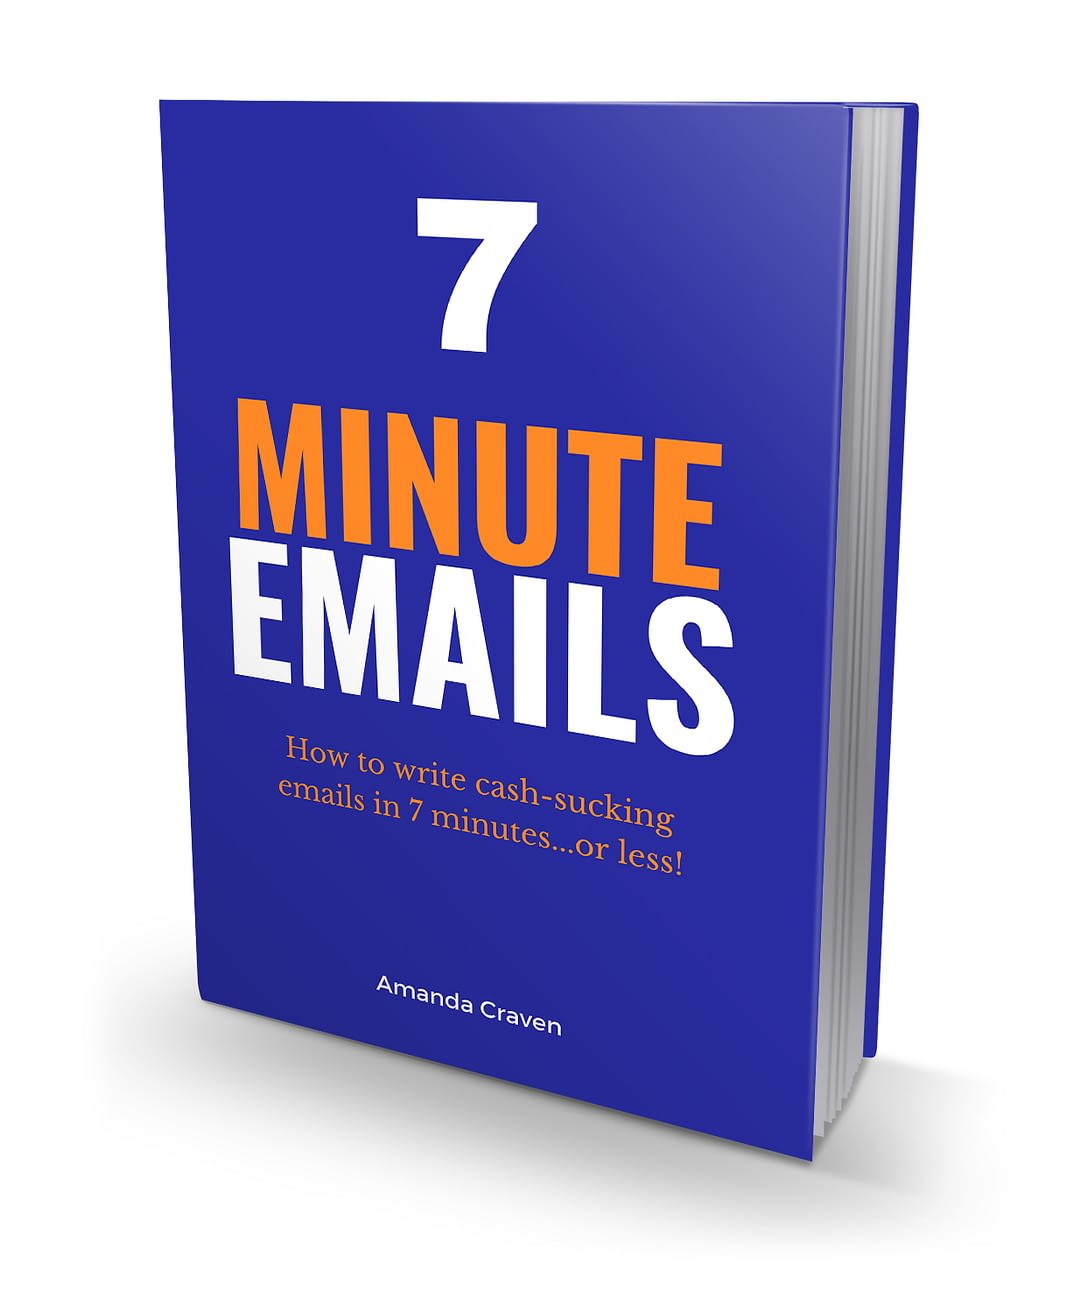 7 Minute Emails